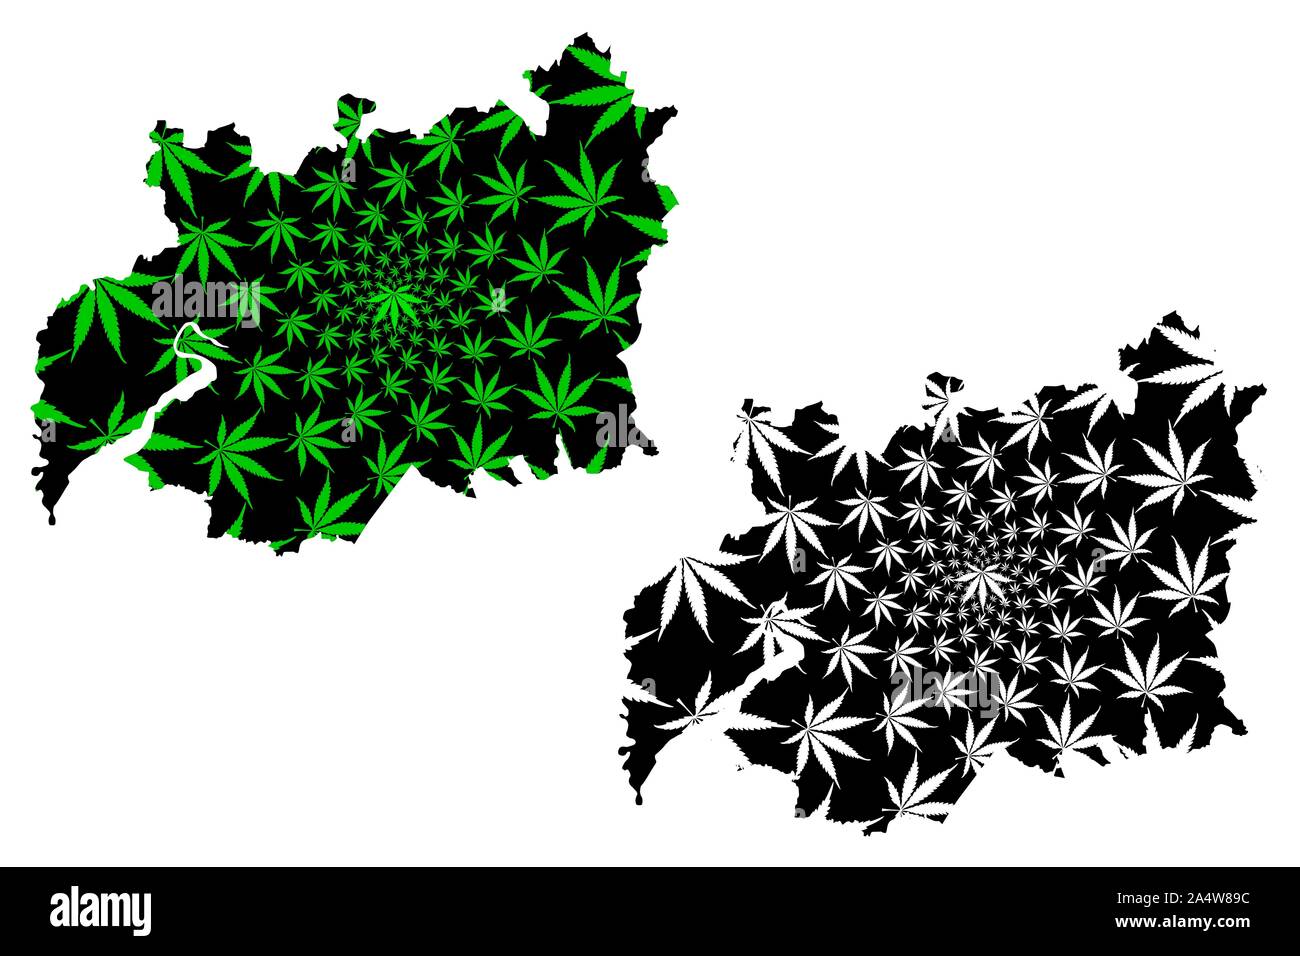 Gloucestershire (United Kingdom, England, Non-metropolitan county, shire county) map is designed cannabis leaf green and black, Gloucs. (Glos.) map ma Stock Vector